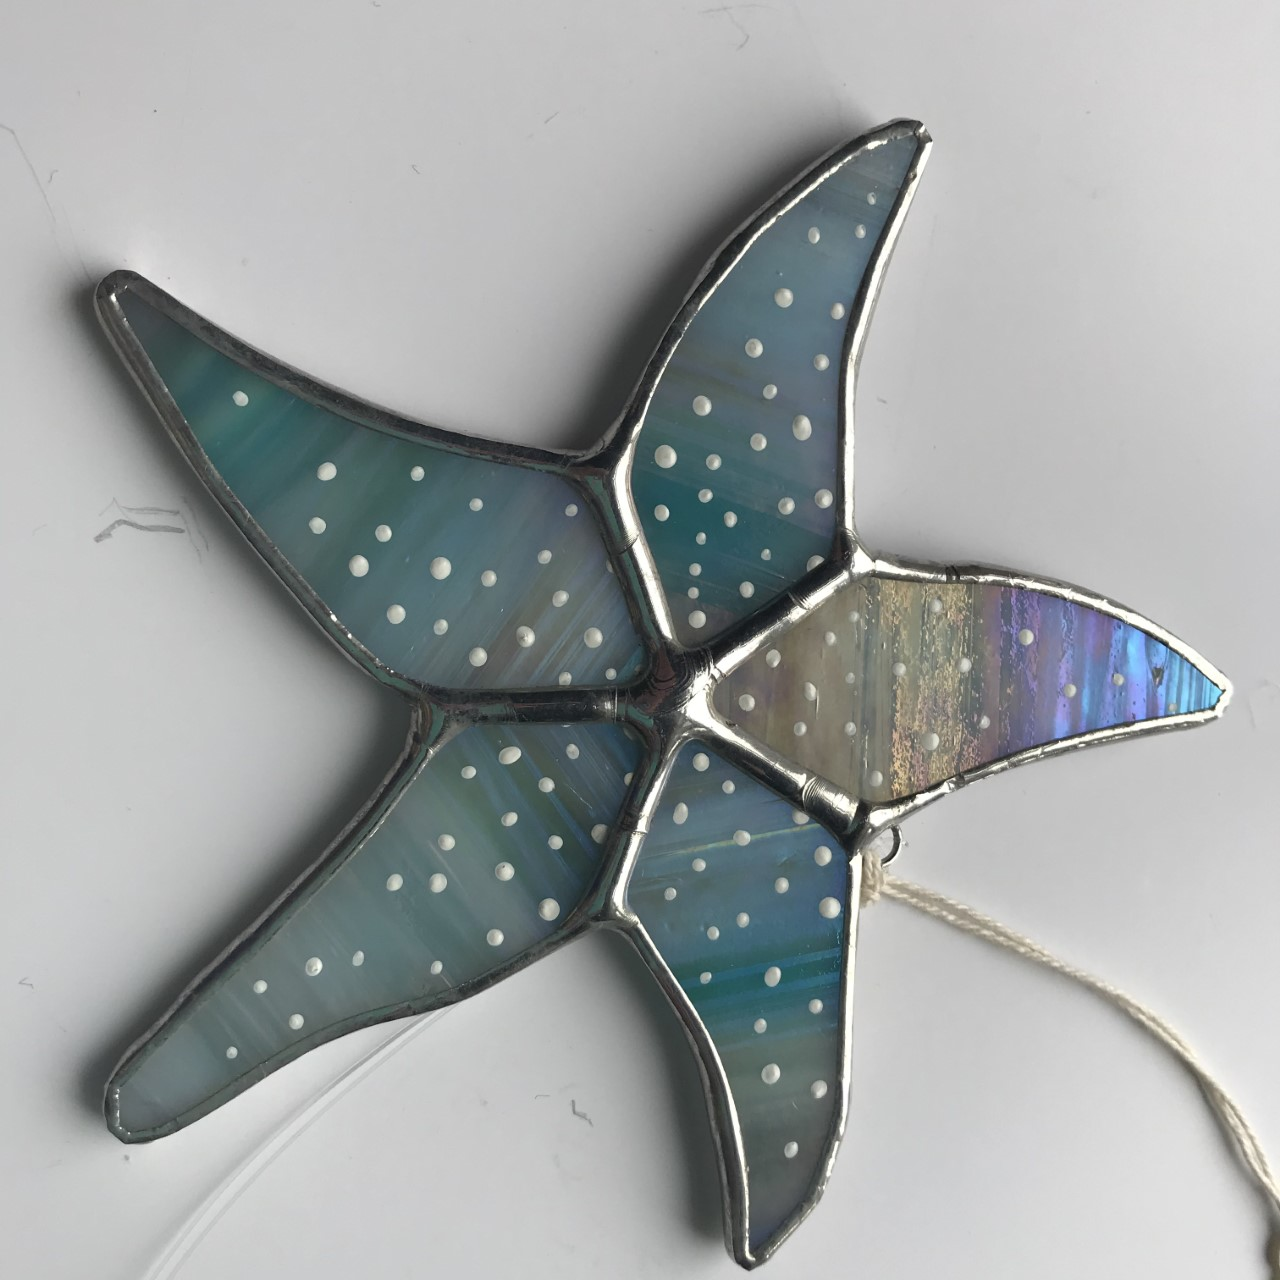 Stained Glass Starfish